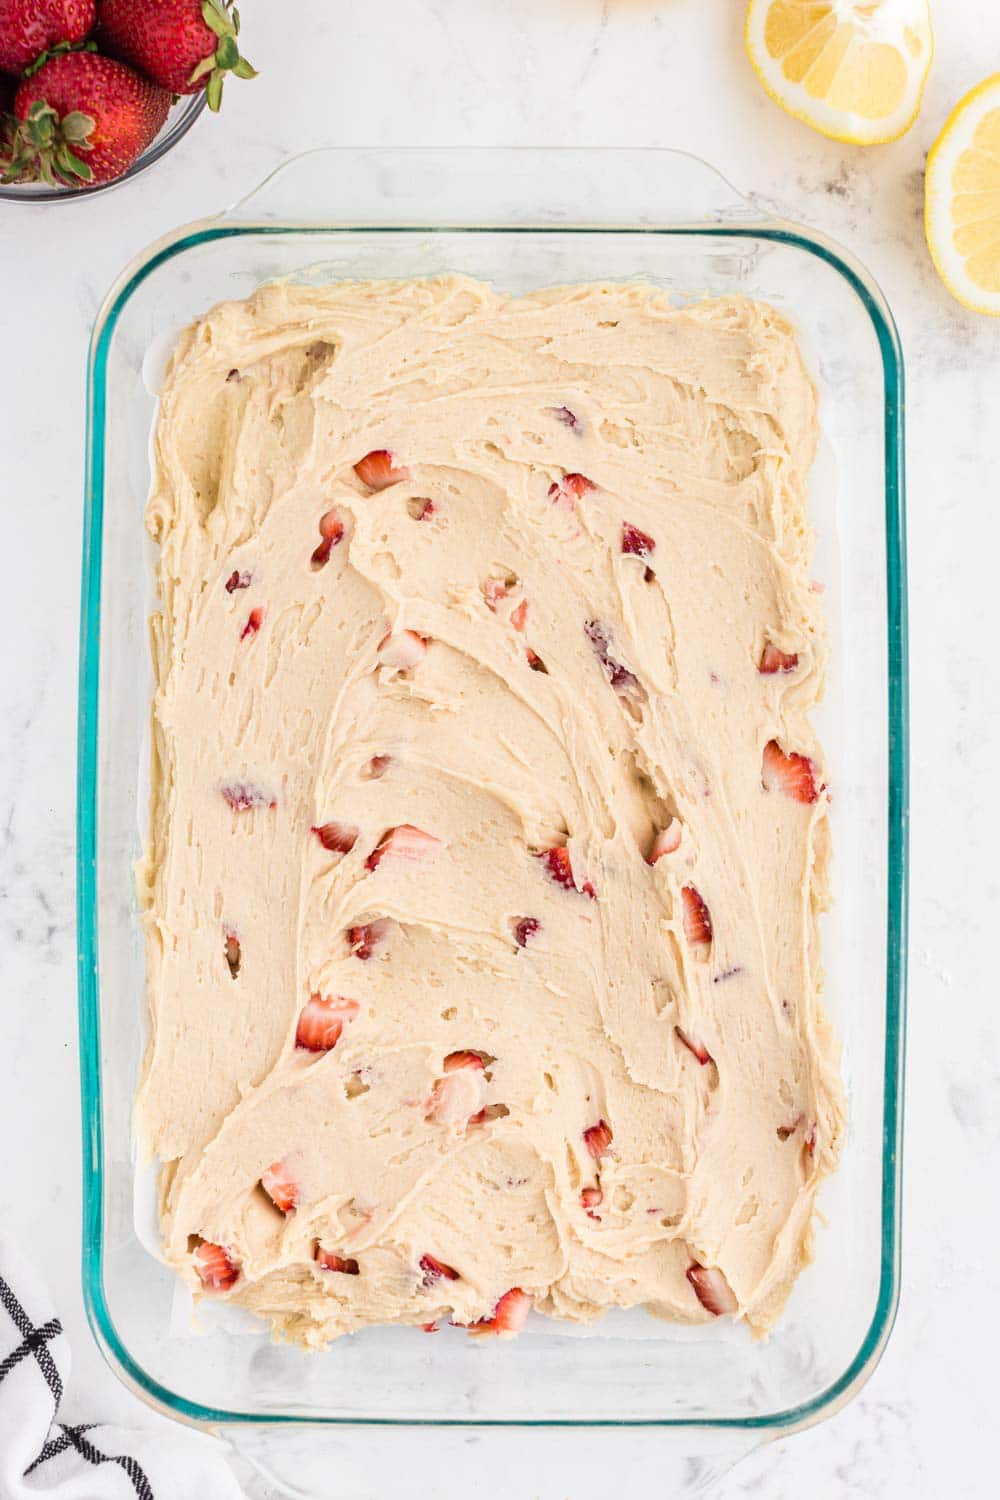 Spread out Strawberry Blondie batter in glass pie dish